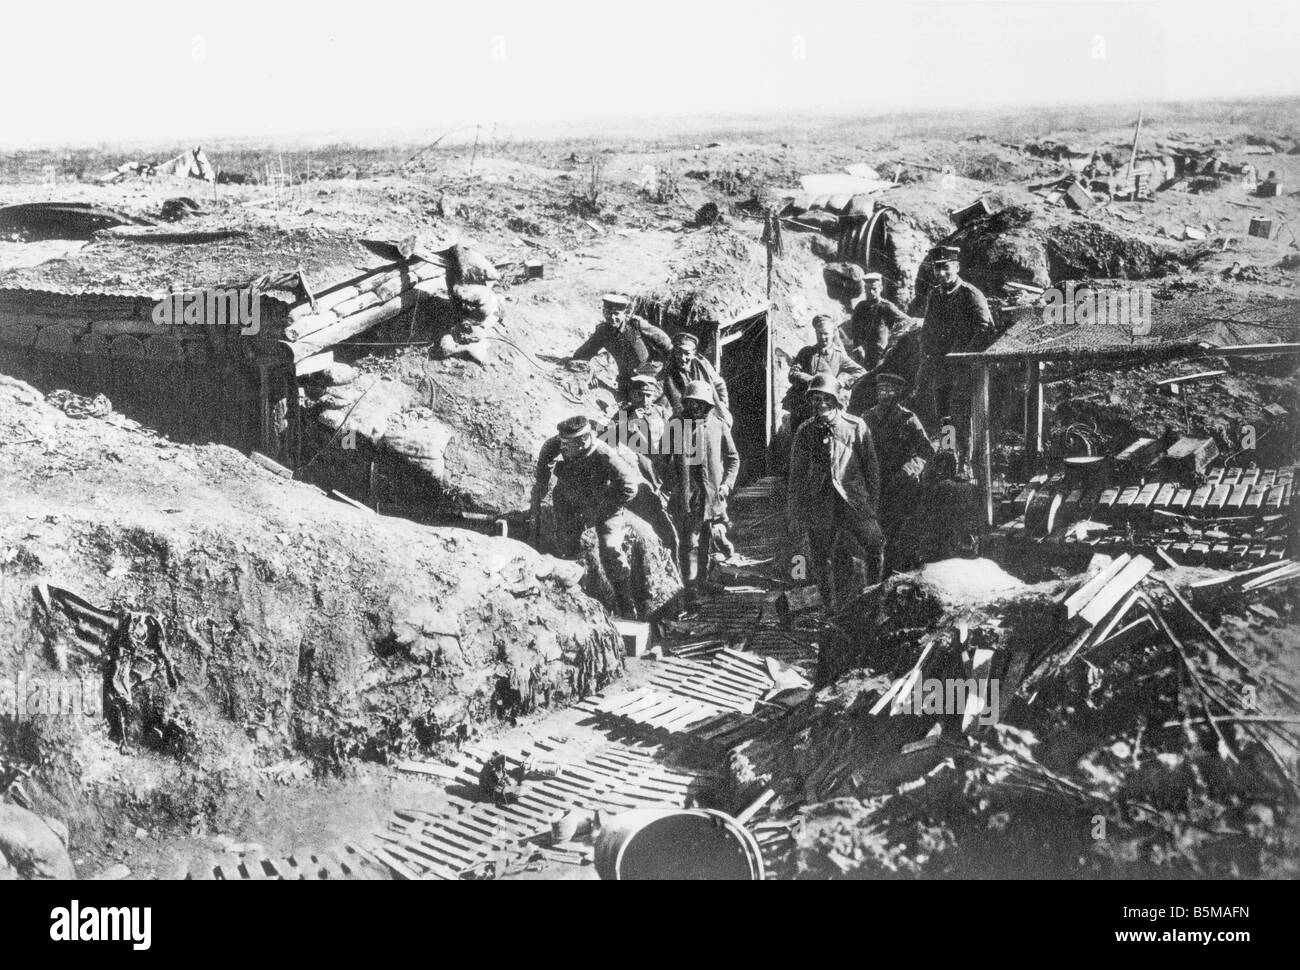 2 G55 W1 1918 28 E Captured English position WWI 1918 History World War I Western Front The great battle in the West English lin Stock Photo